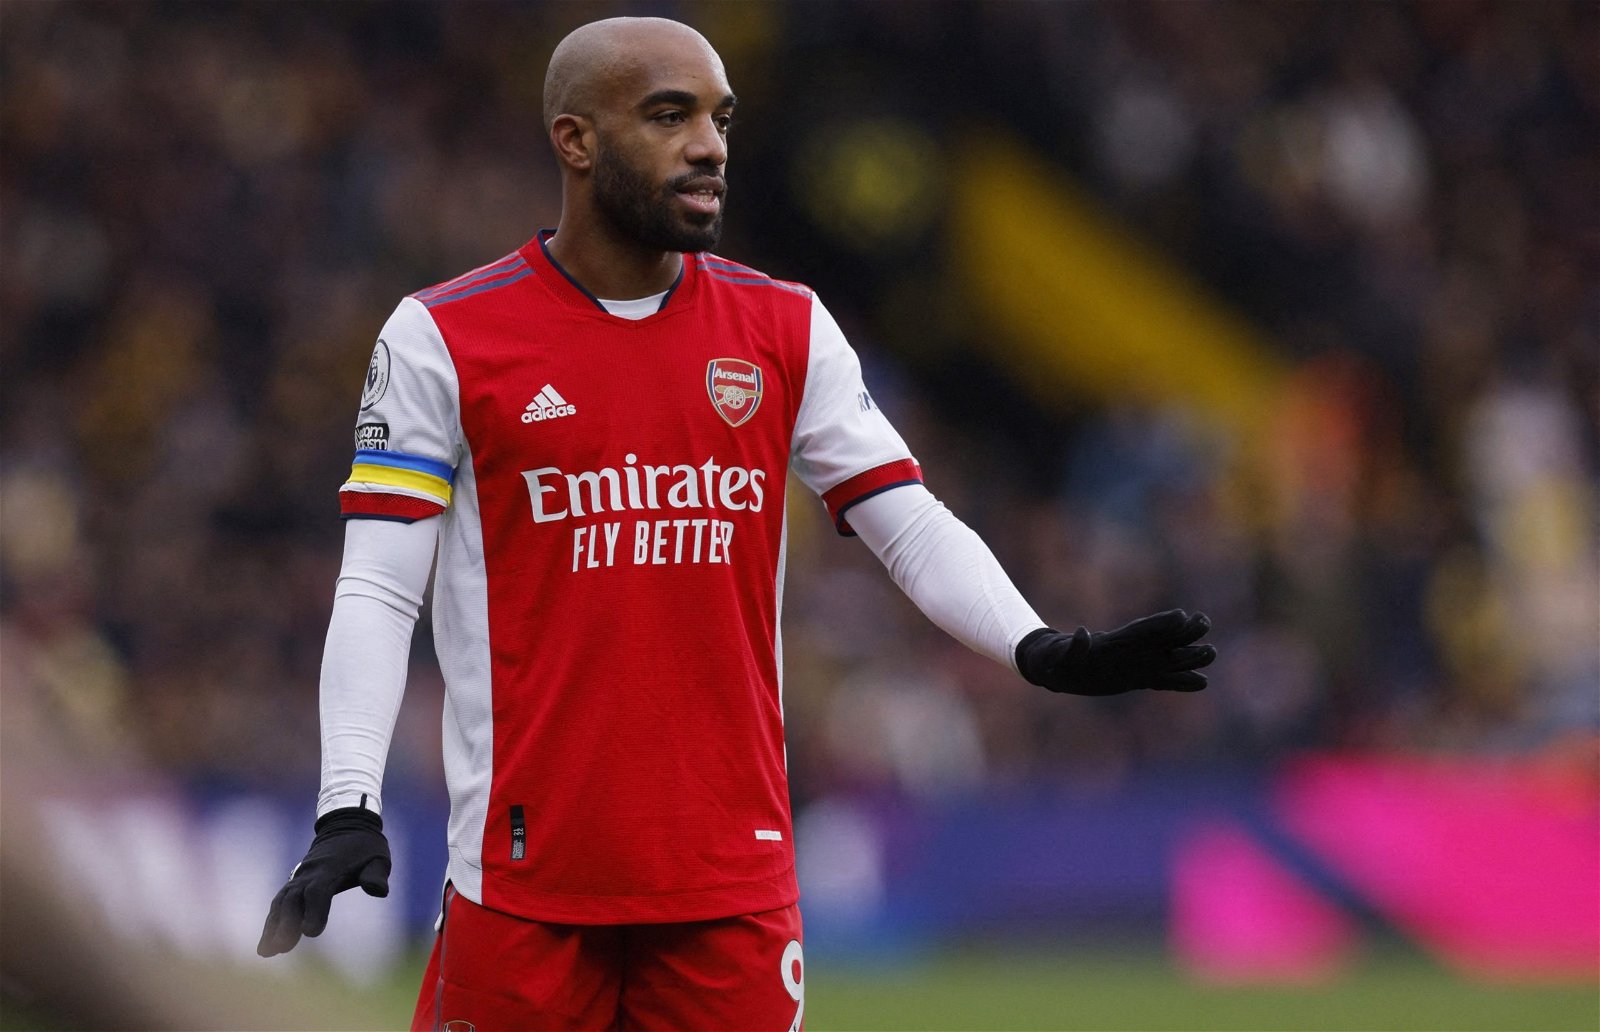 Alexandre Lacazette told to apologise to Arsenal after ‘insulting’ comments – pundit